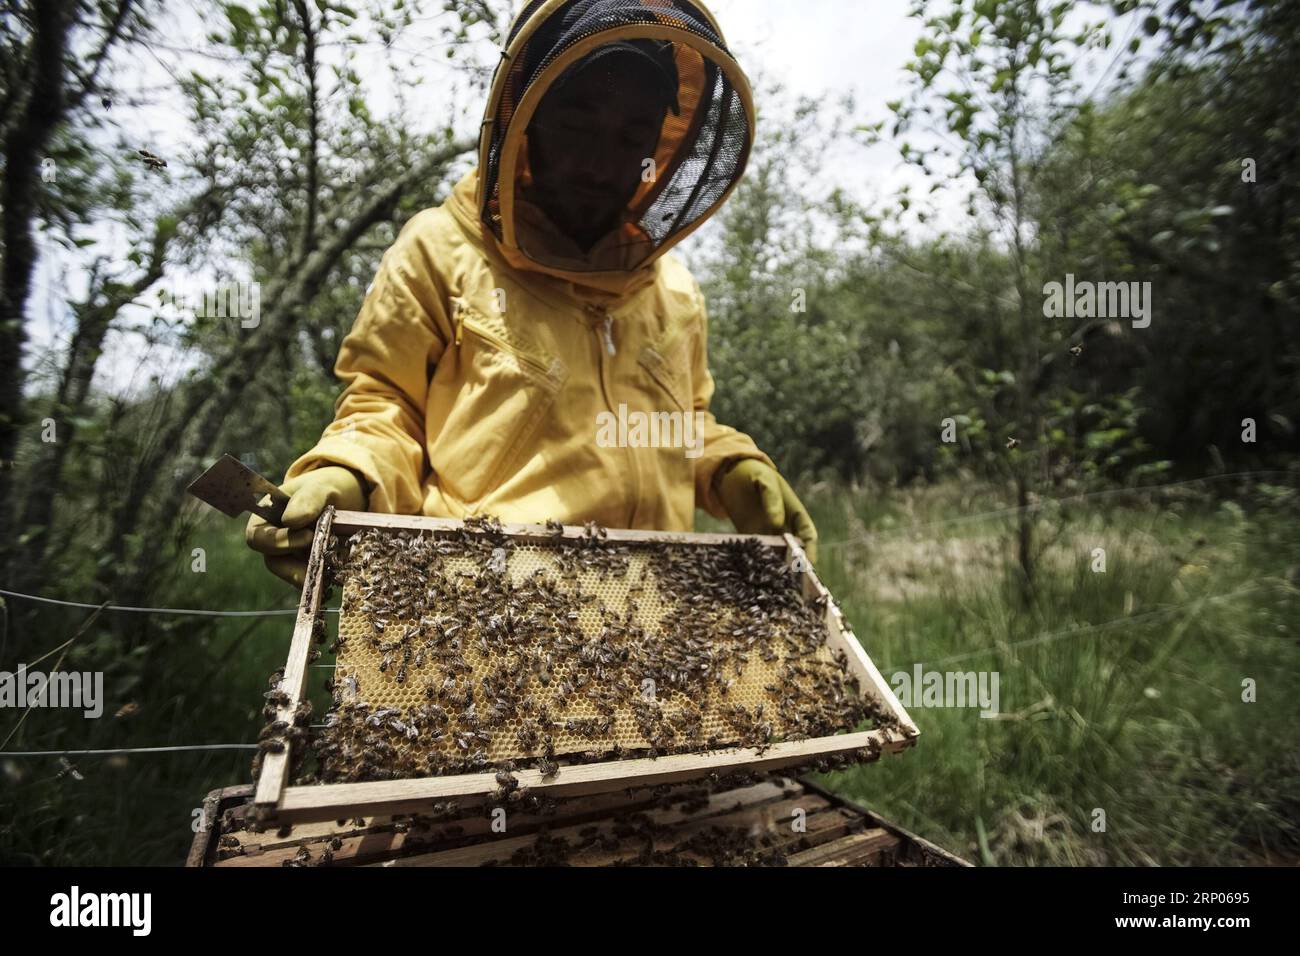 (180422) -- GUASCA, April 22, 2018 -- Beekeeper Fabio Ruiz works in the Montiel natural reserve of Guasca in Colombia, on April 18, 2018. Beekeeper Fabio Ruiz emphasized reduction of the number of bees worldwide, calling for a culture of urban beekeeping. ) (cr) (vf) COLOMBIA-GUASCA-BEEKEEPING-EARTH DAY JHONxPAZ PUBLICATIONxNOTxINxCHN Stock Photo